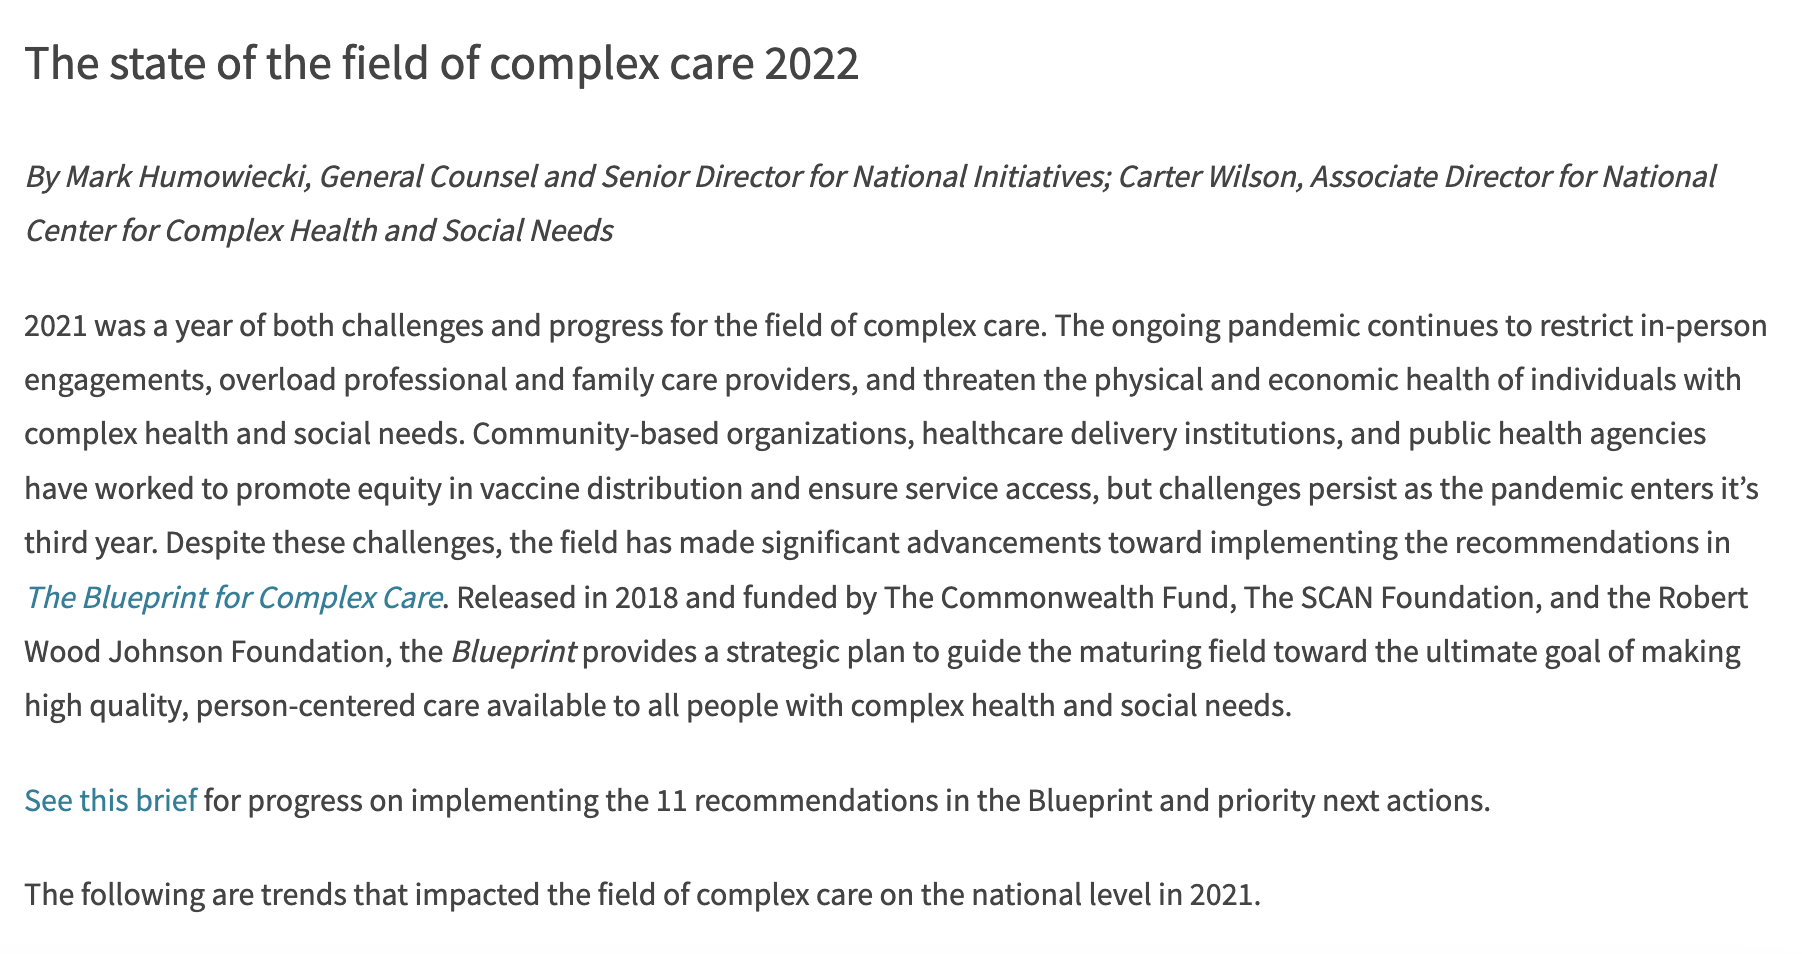 The State of the Field of Complex Care 2022